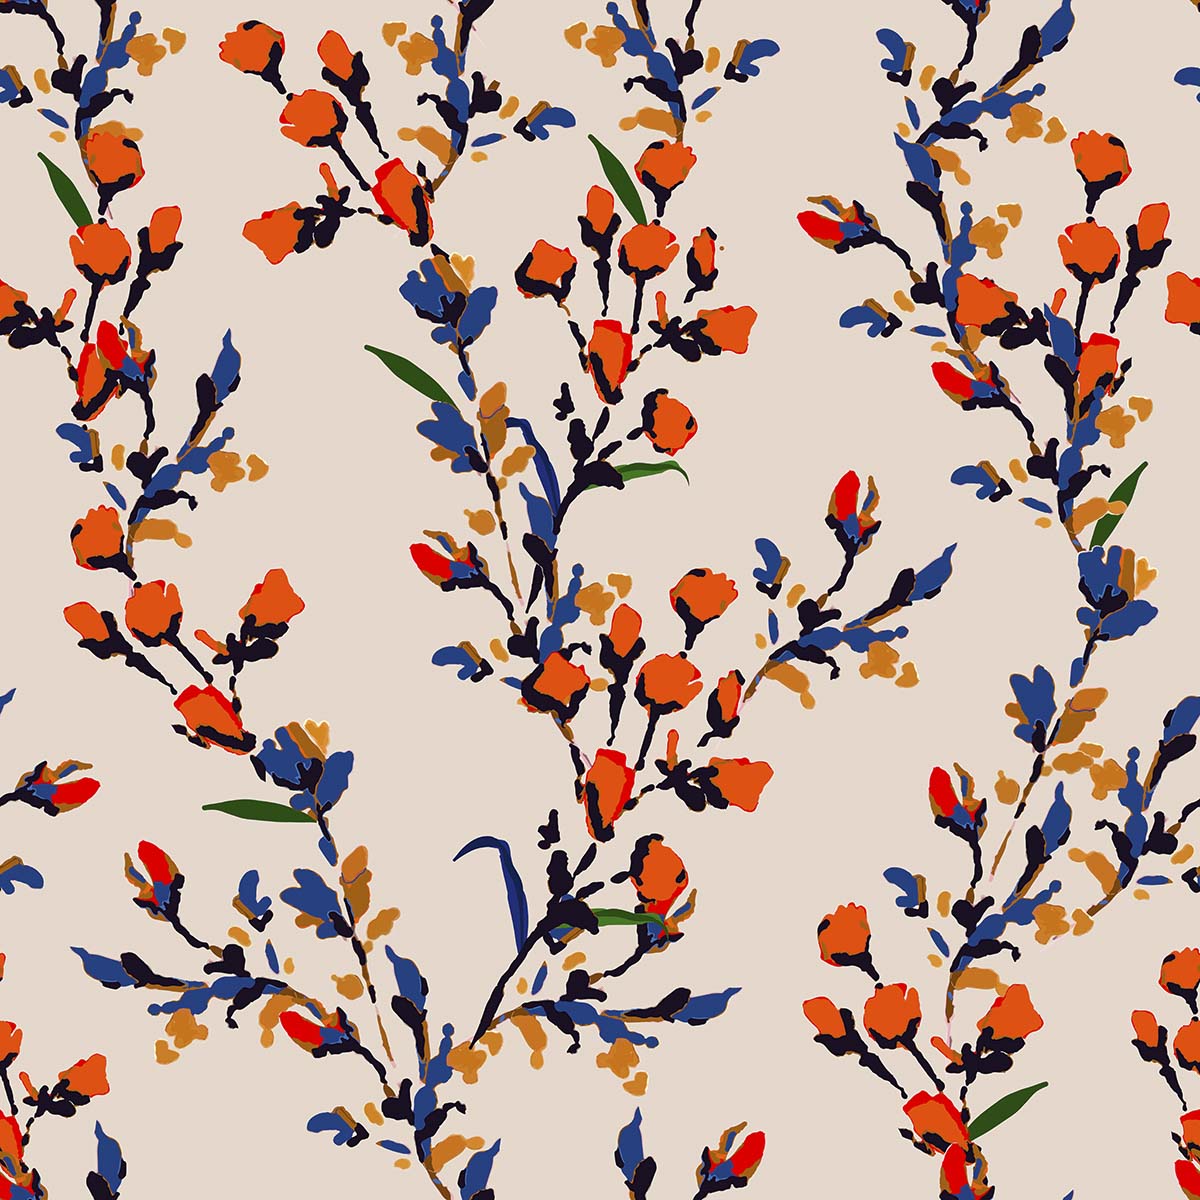 A pattern of orange flowers and blue leaves